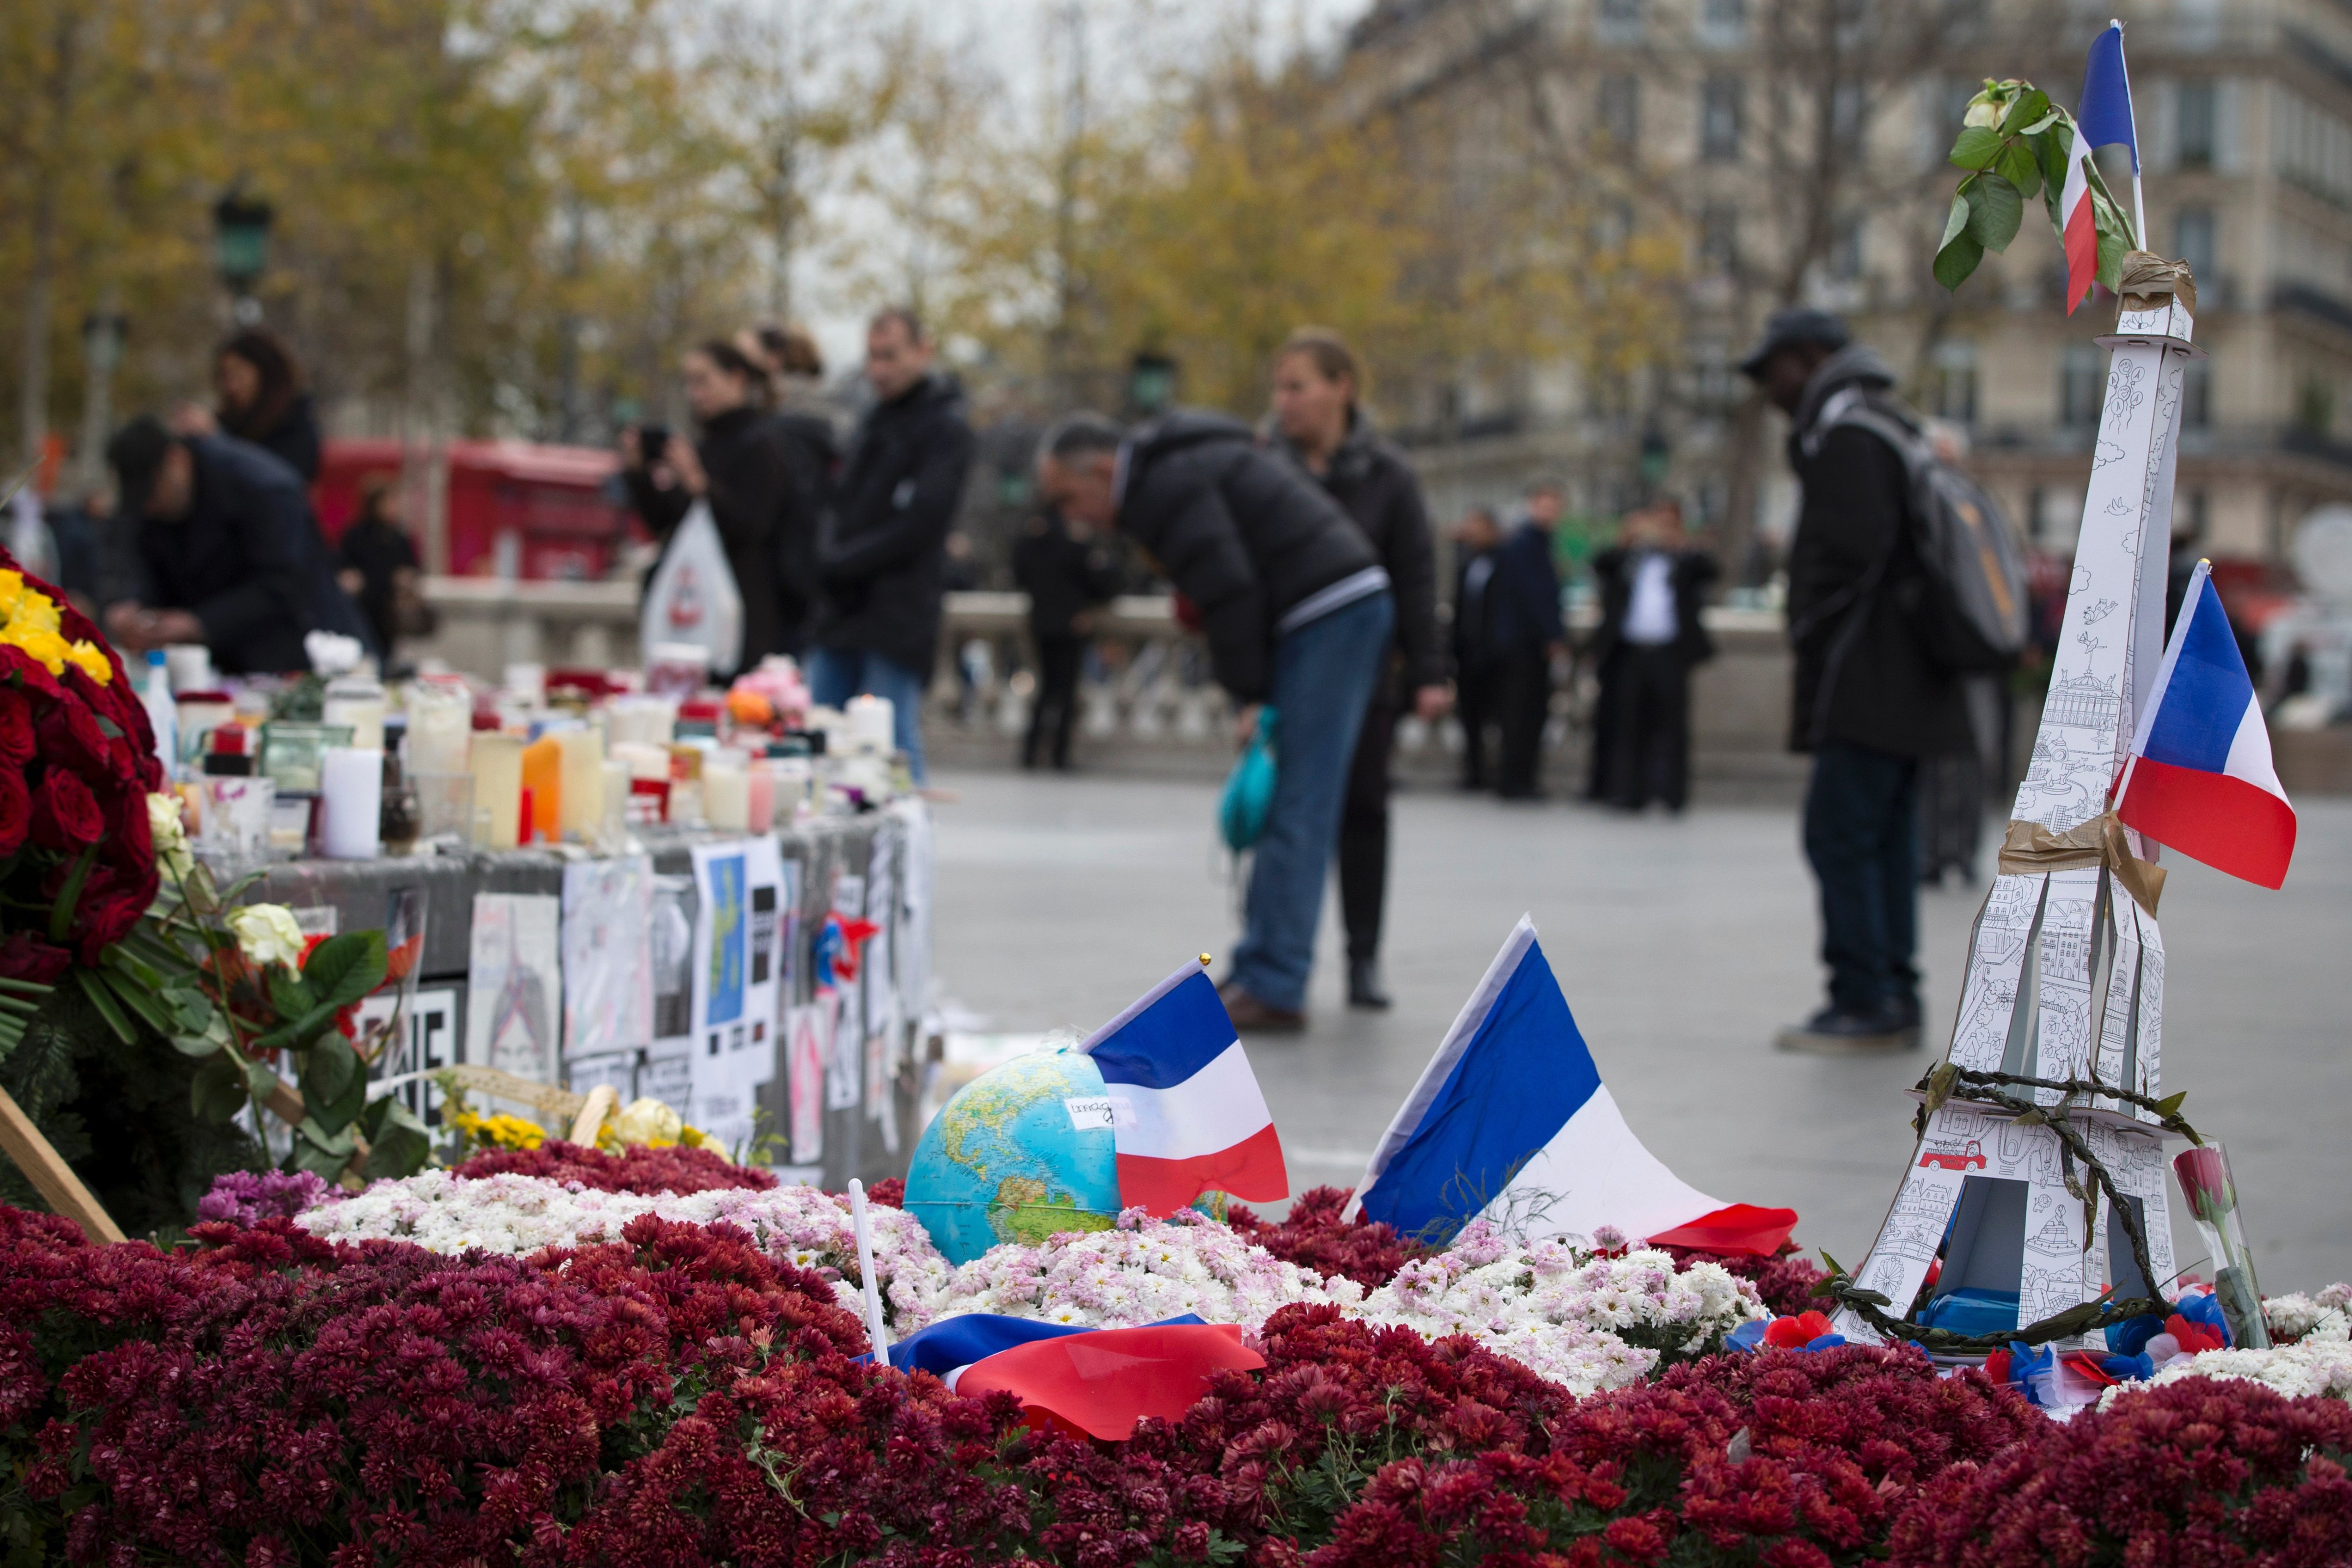 People stand on the Place de la Republique in Paris on December 2, 2015, next to a model Eiffel Tower, flowers and French flags layed in memory of the victims of the deadly attacks in and around Paris on Nov. 13.